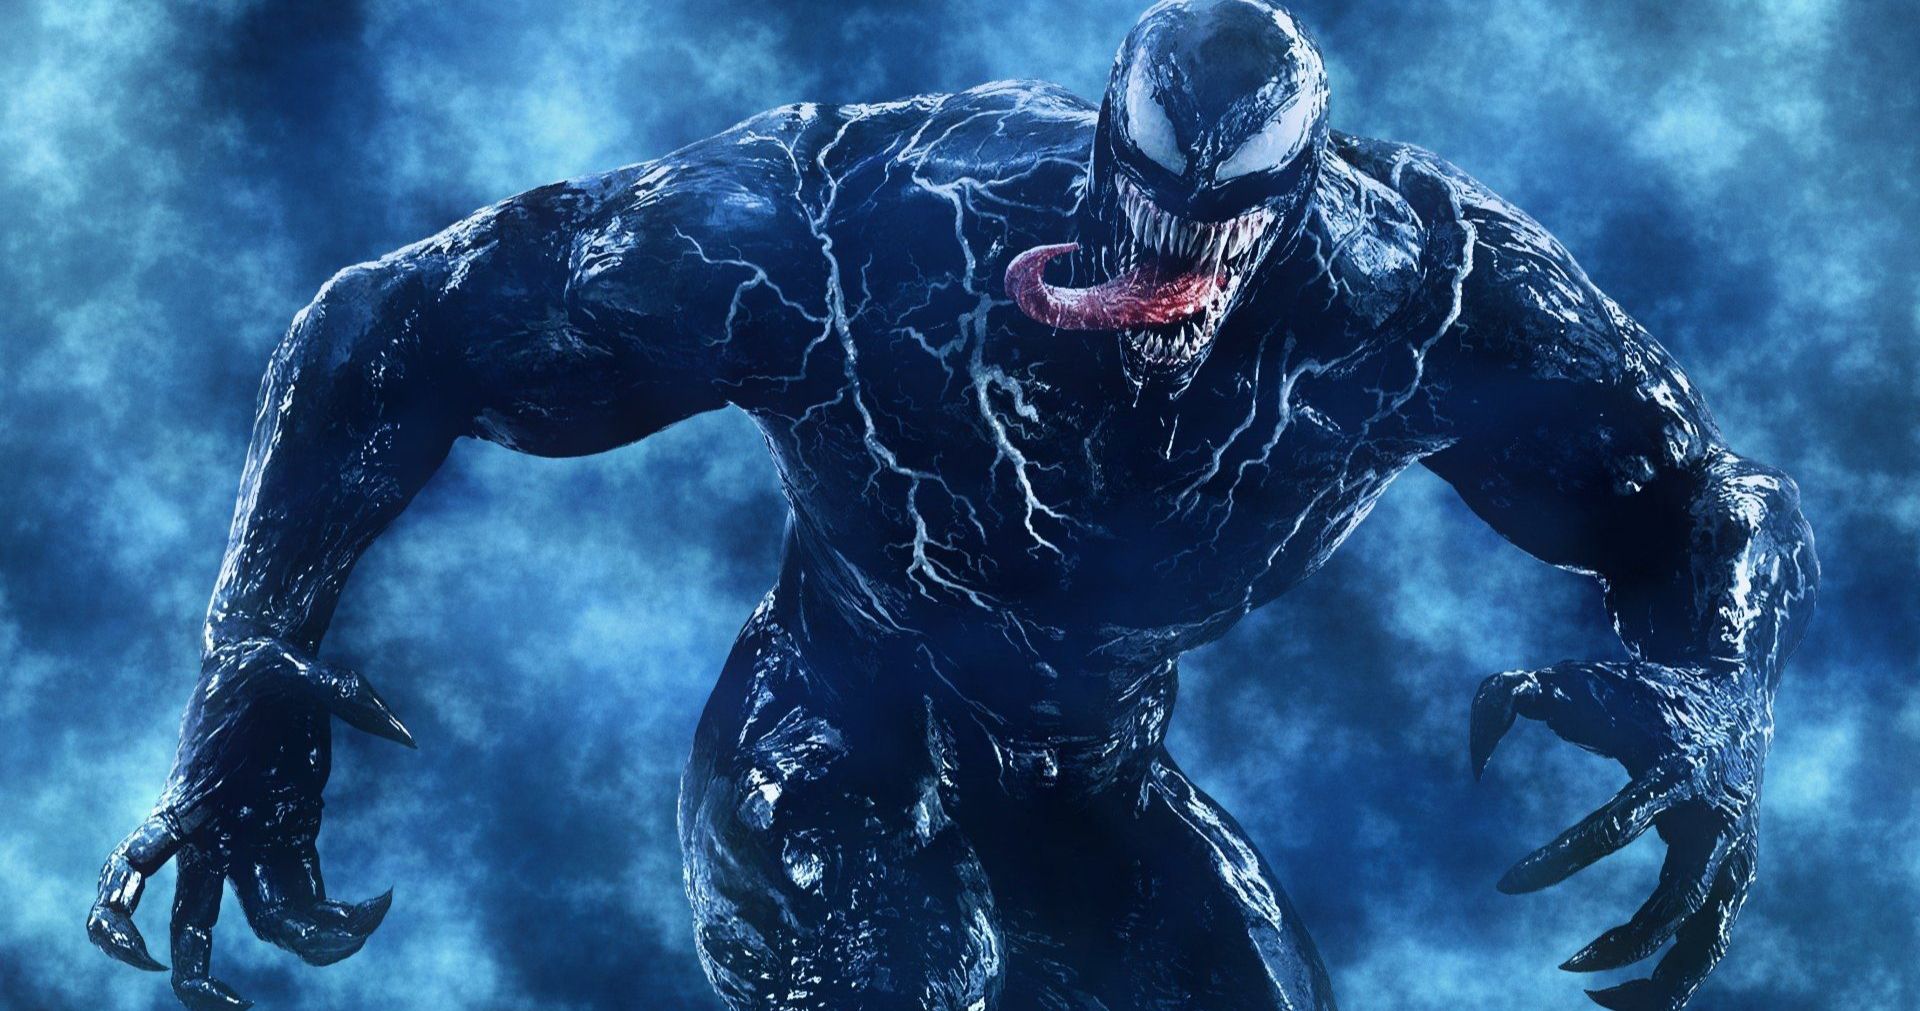 Where's the Venom 2 Trailer? Director Andy Serkis Explains His Release Strategy